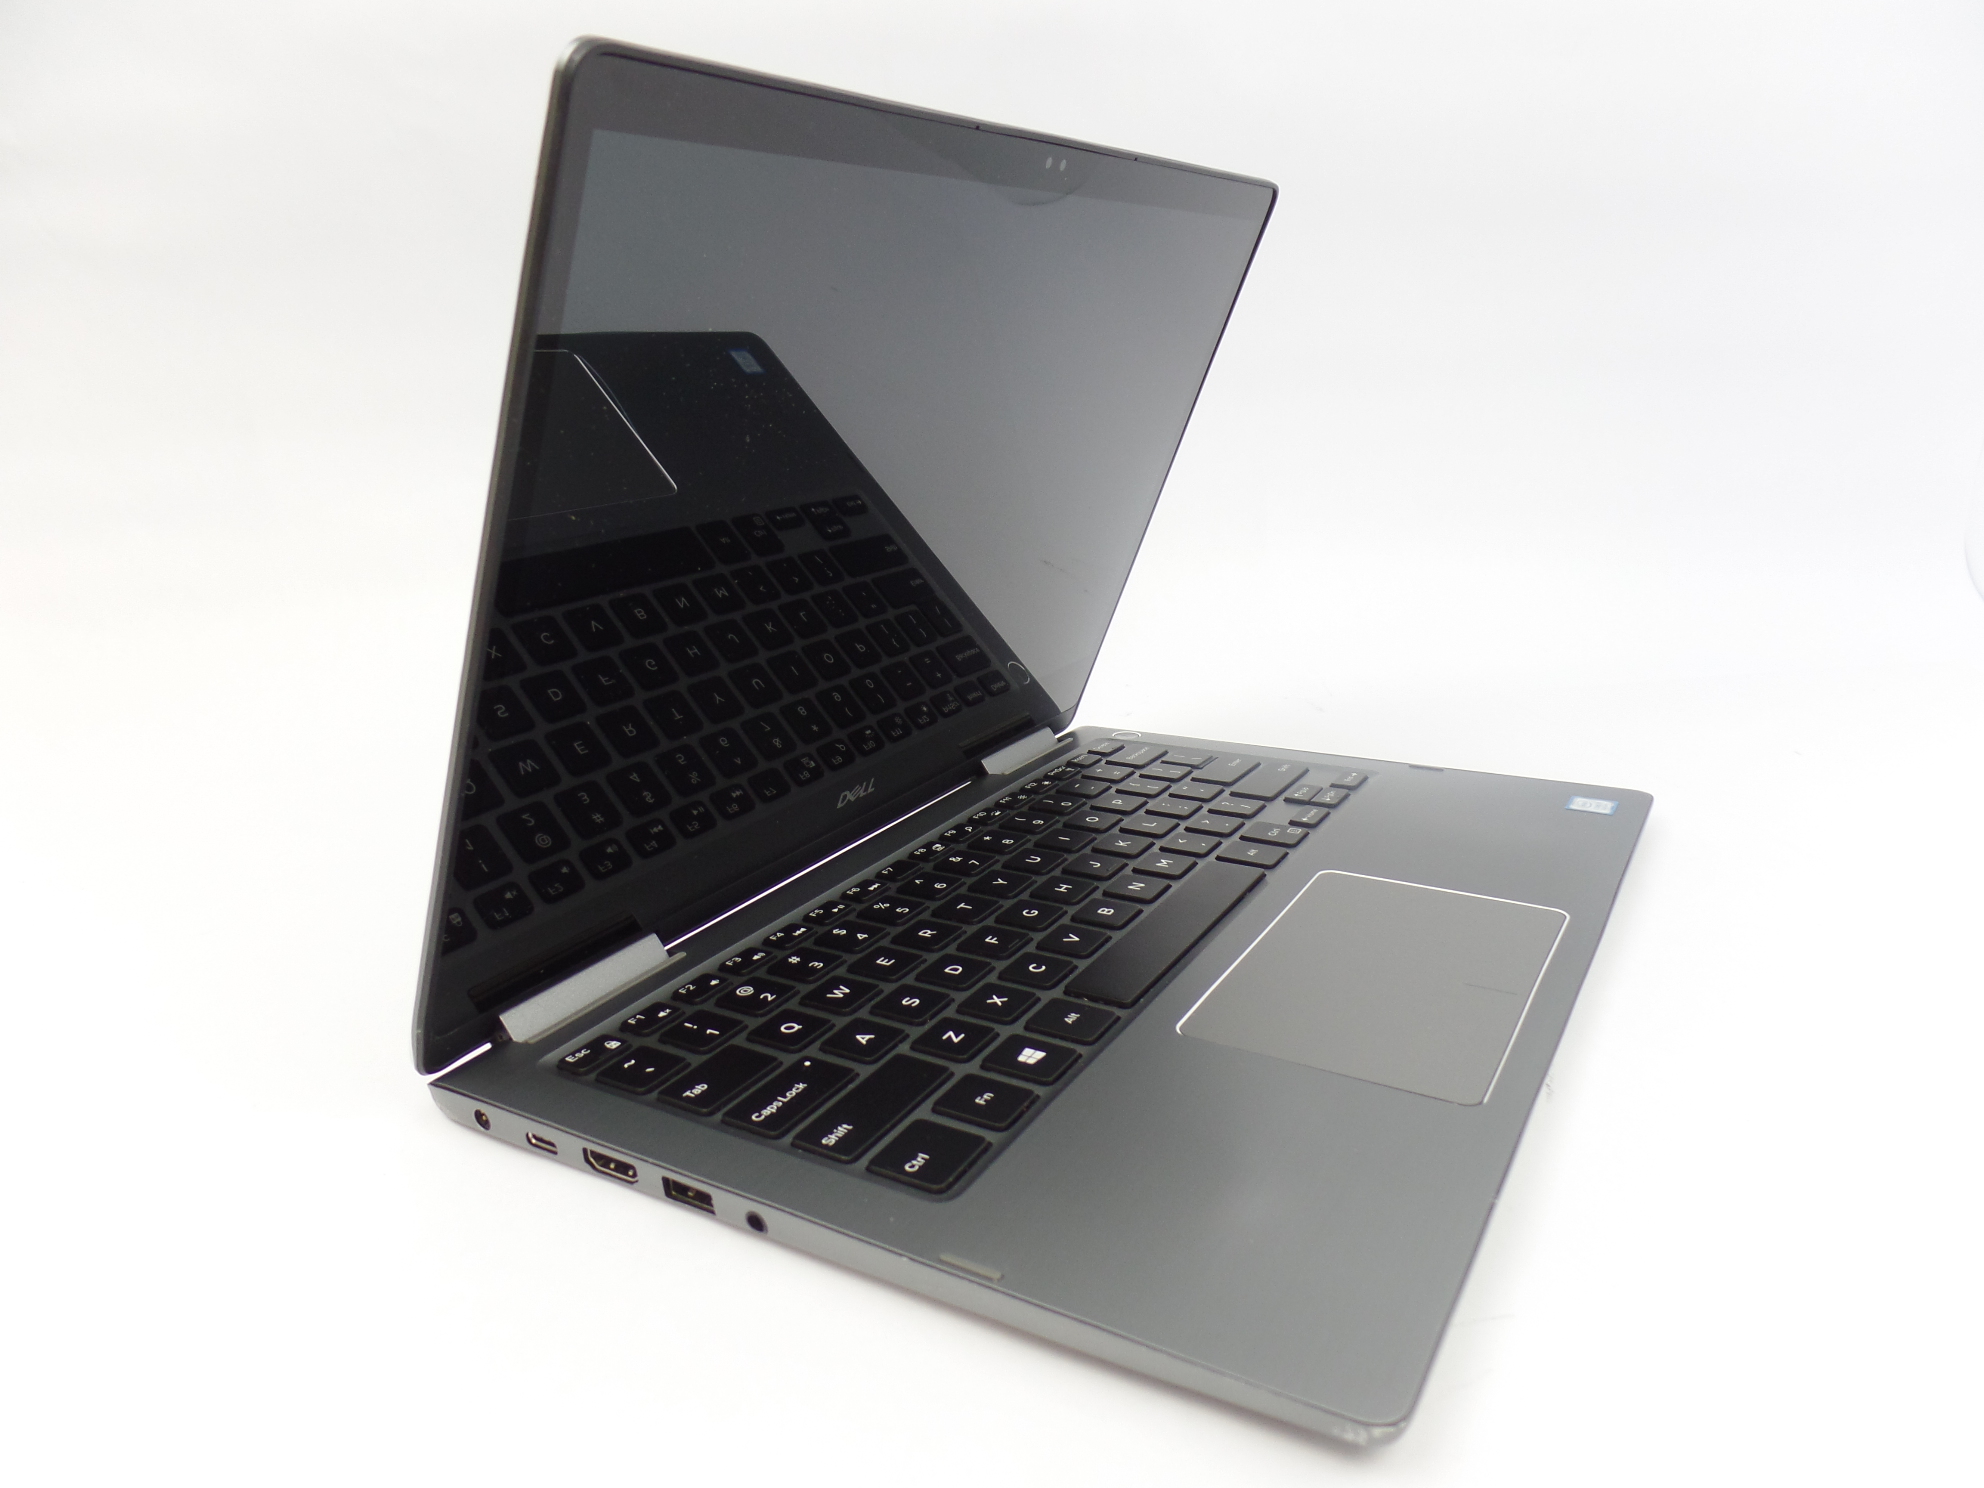 Used (good working condition) Dell Inspiron 7373 13.3" FHD Touch i7-8550U 16GB 256GB SSD W10P 2in1 Laptop U - image 4 of 6